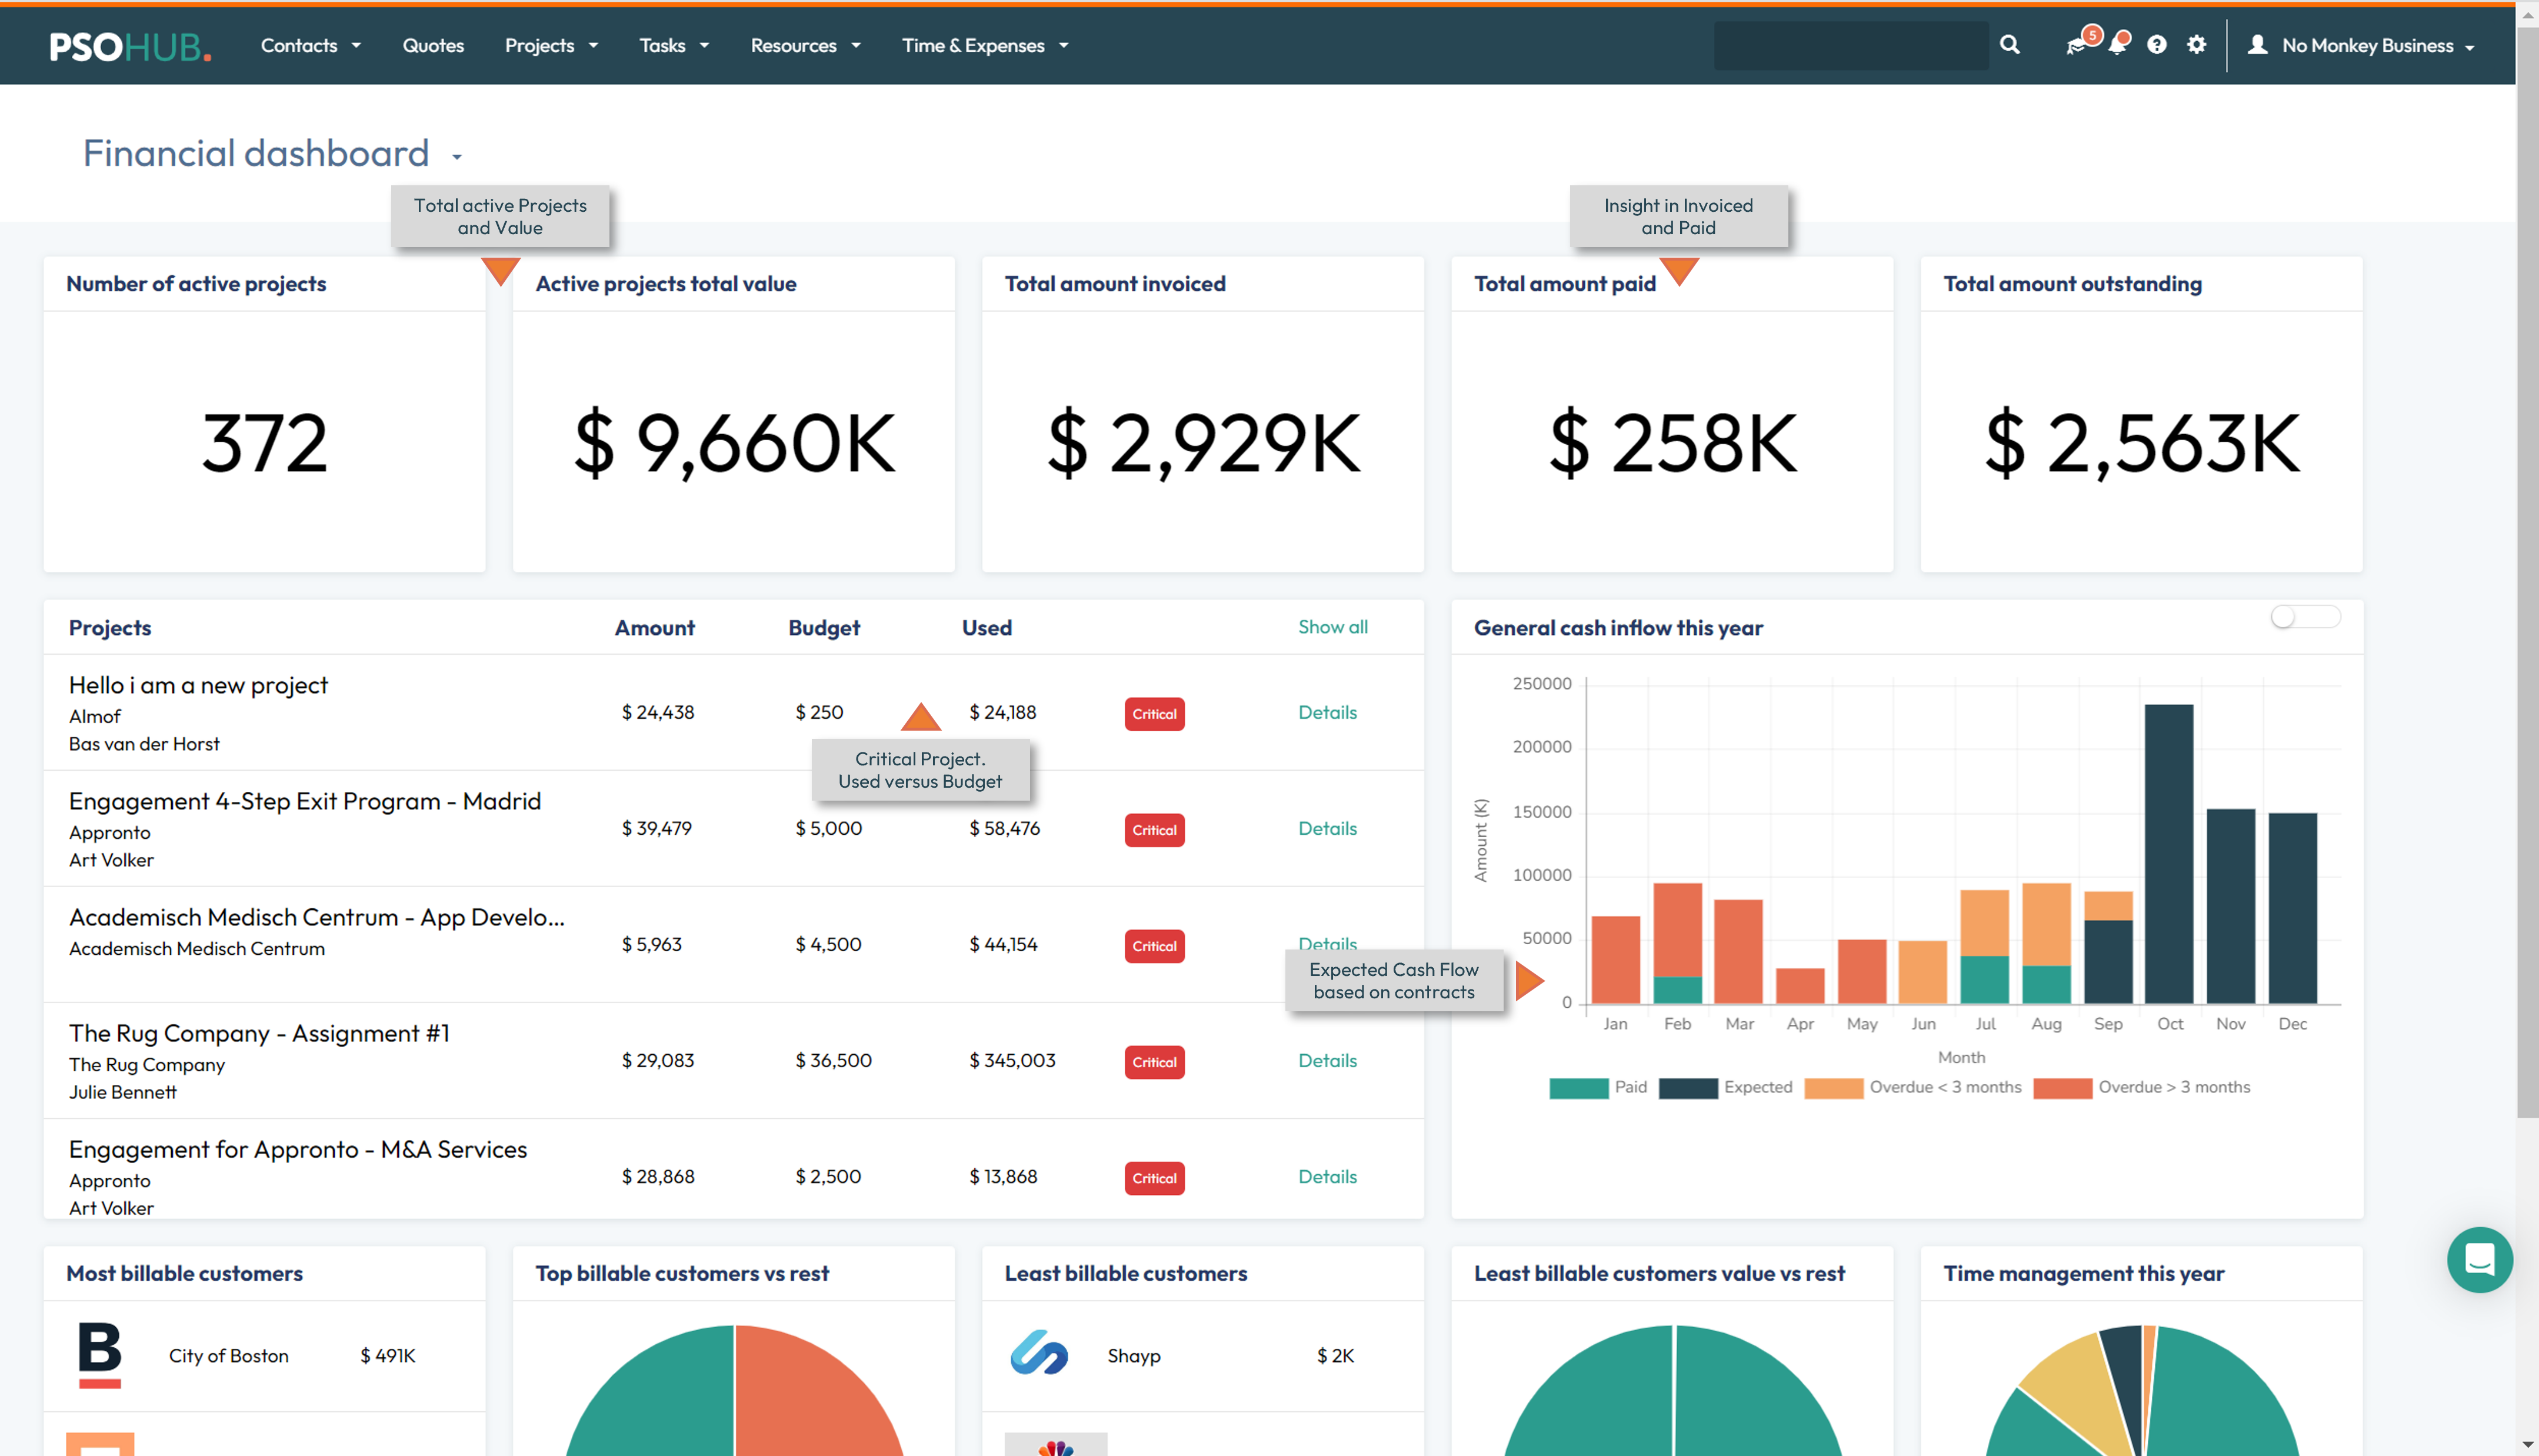 PSOhub dashboards give you real-time insights in the value of your projects, projects that need attention, insight in invoices and expected cash flow.